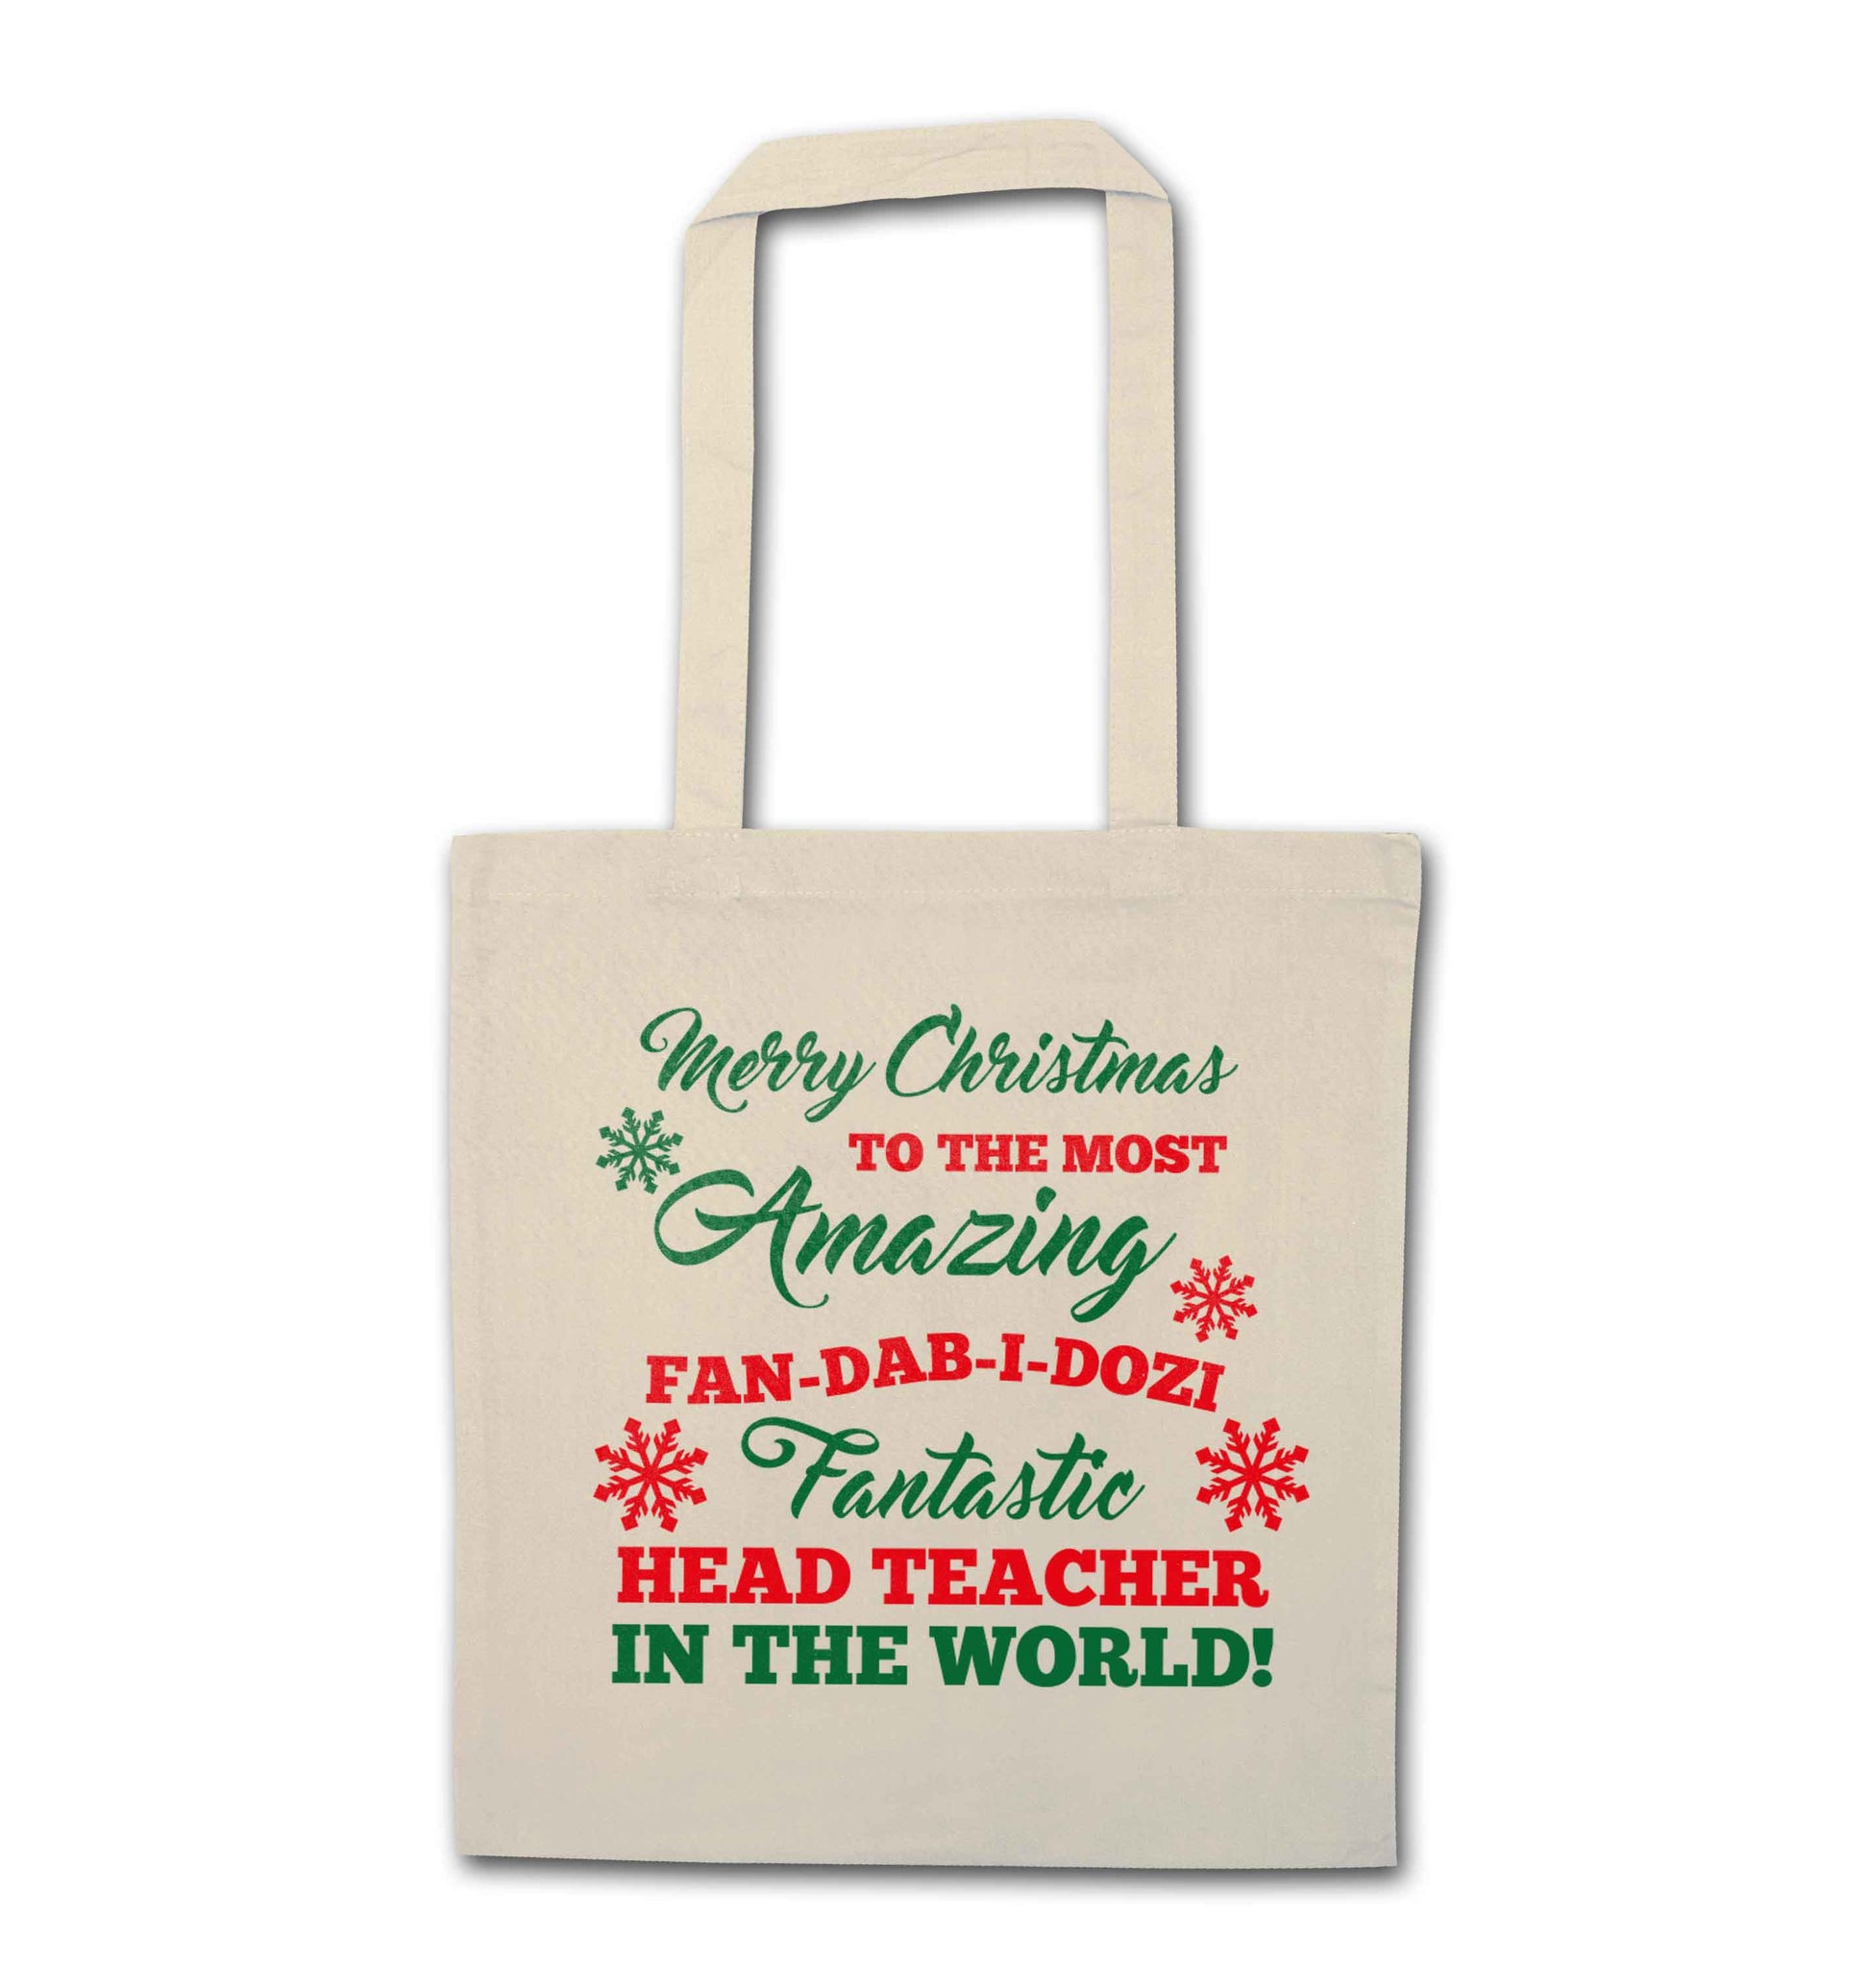 Merry Christmas to the most amazing fan-dab-i-dozi fantasic head teacher in the world natural tote bag